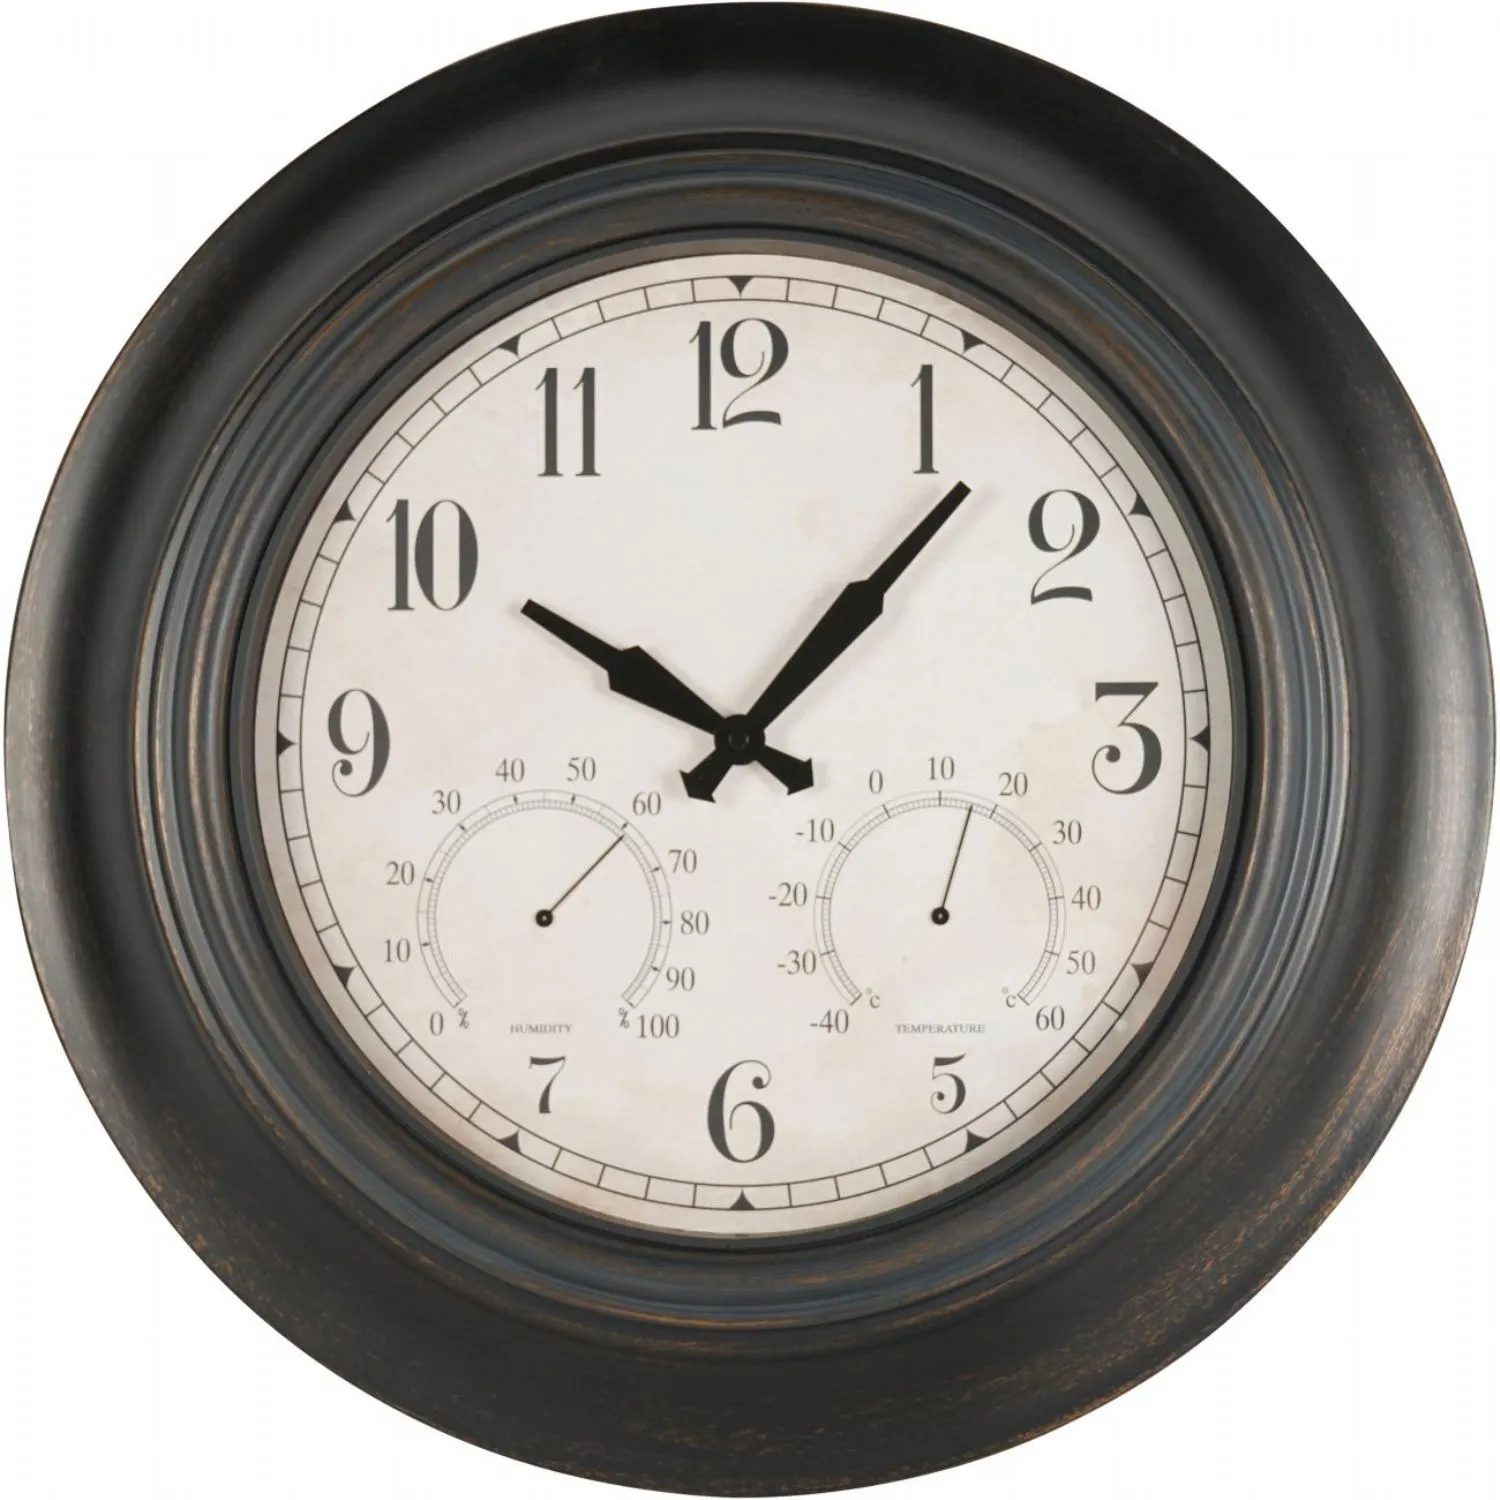 Black Outdoor Metal Clock with Temp and Humidity Dials